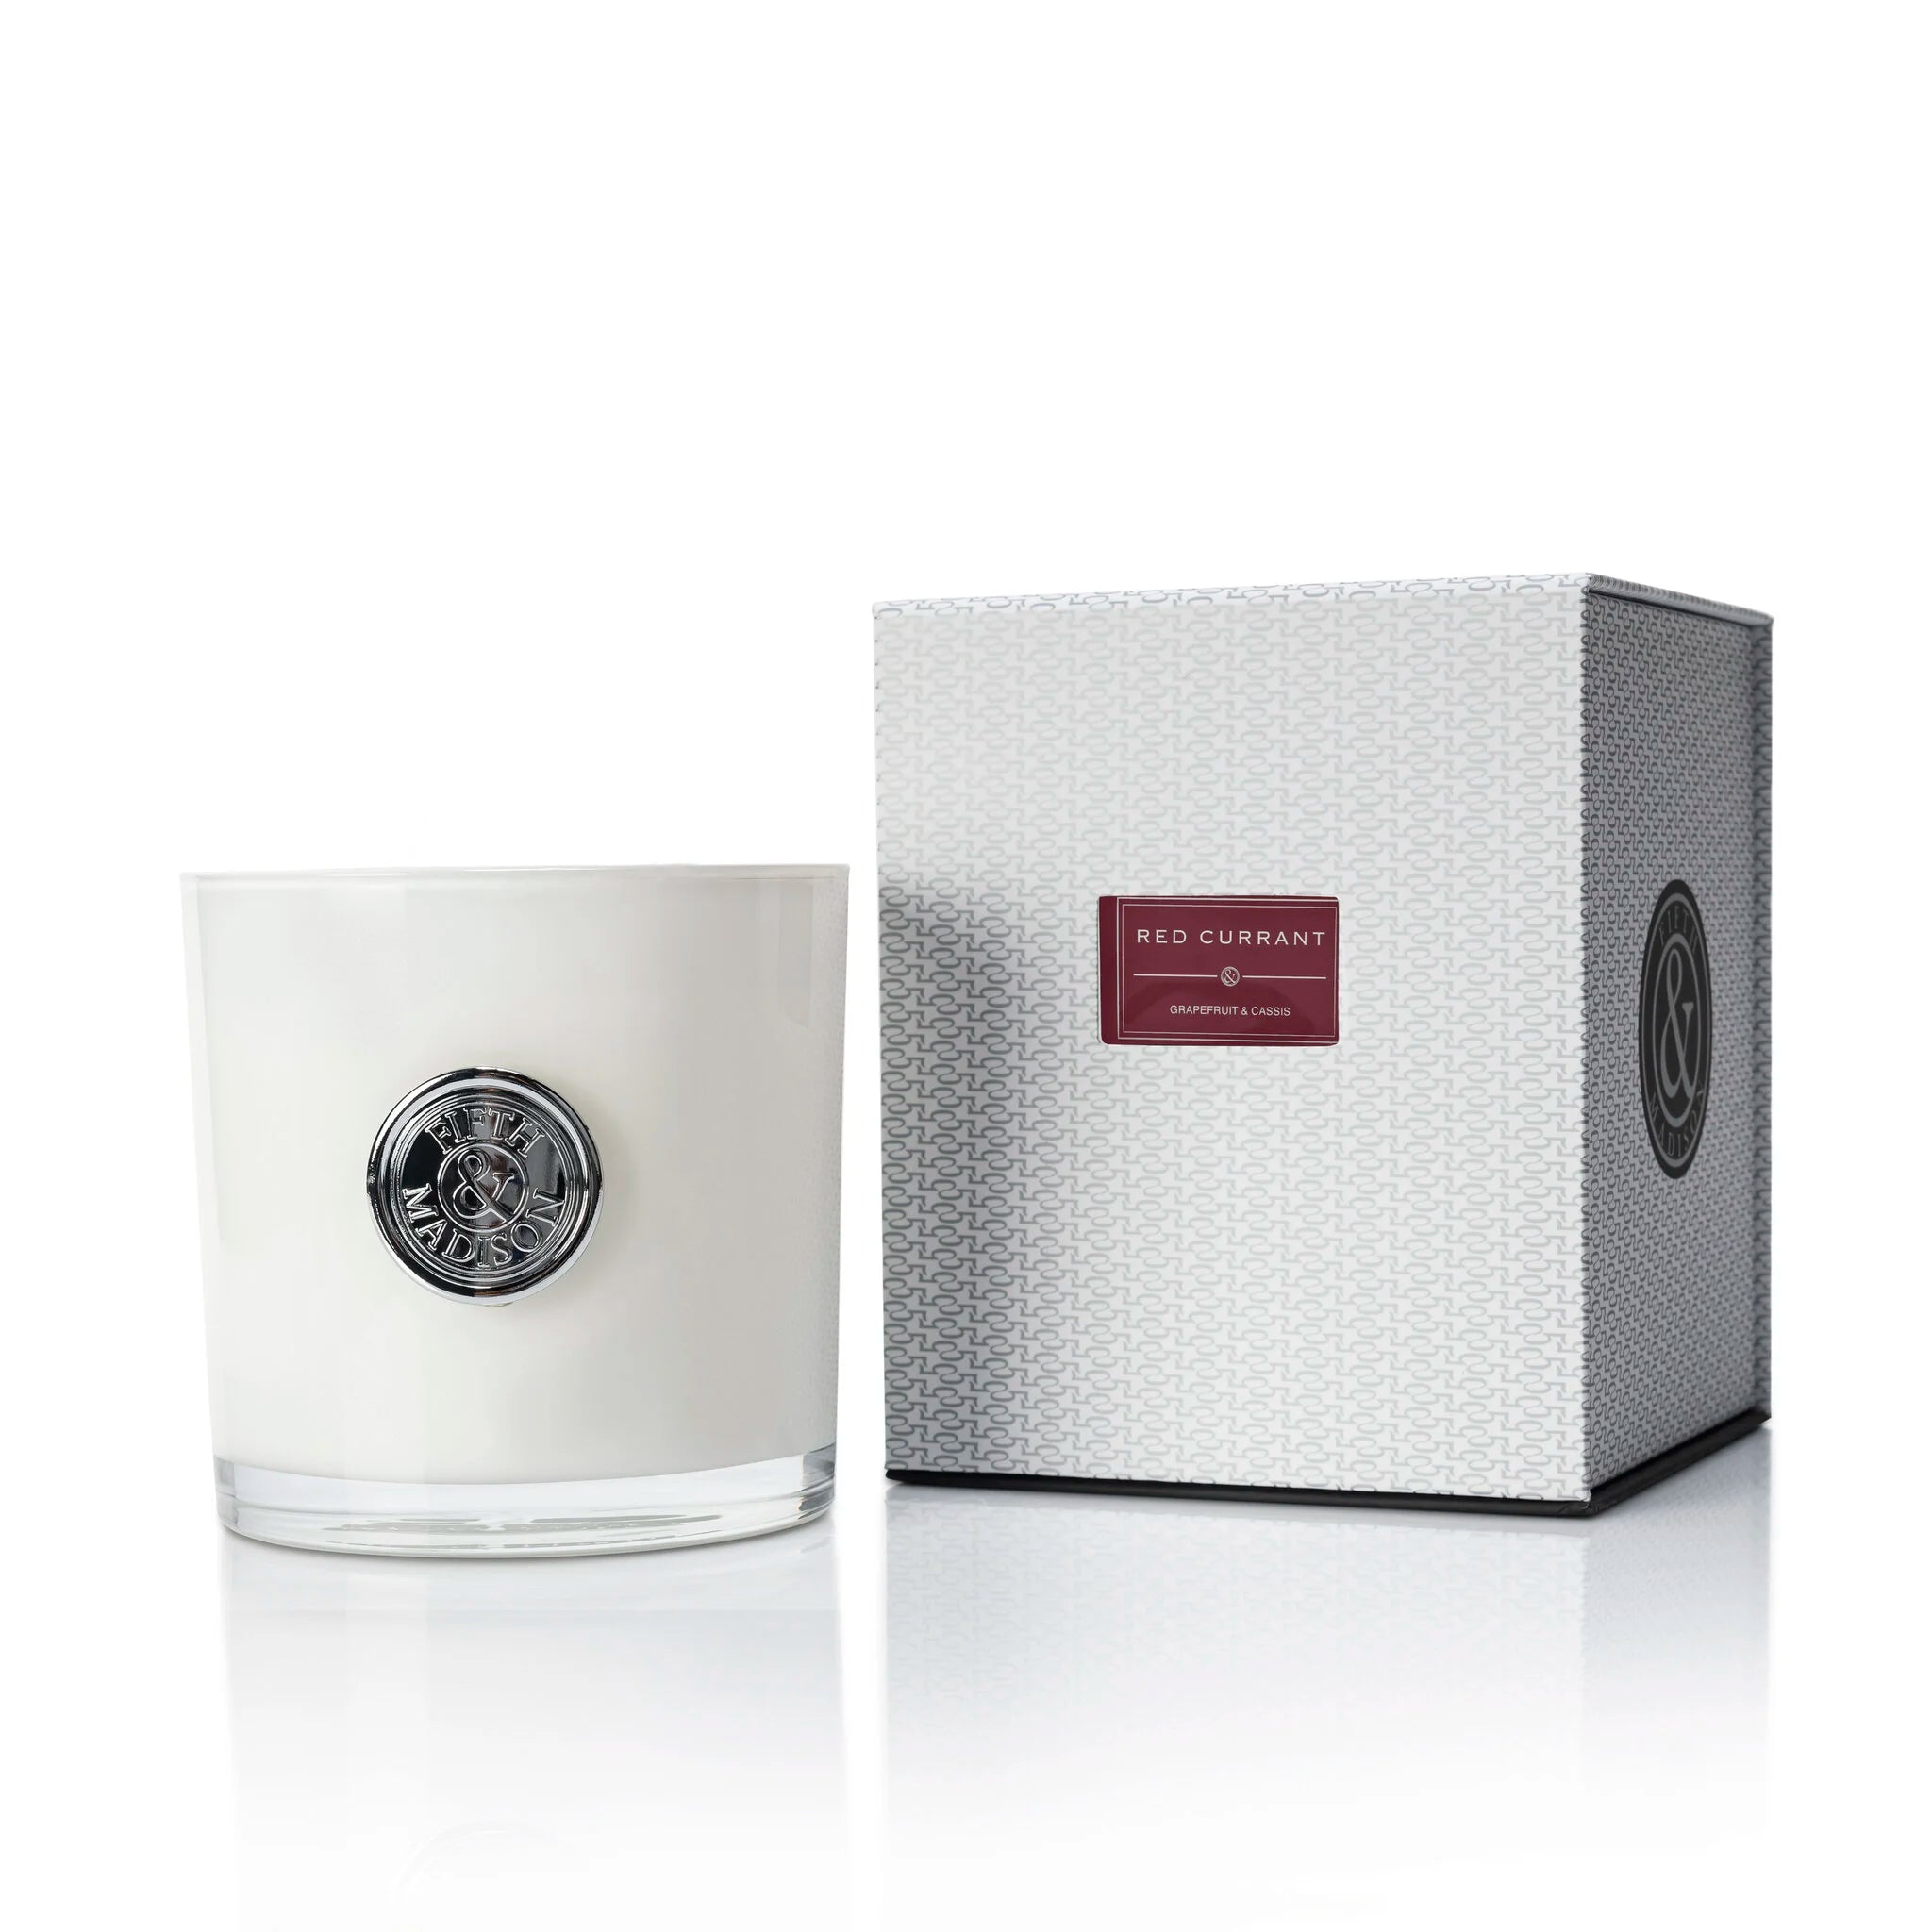 Red Currant Gramercy Penthouse Triple Wick Candle